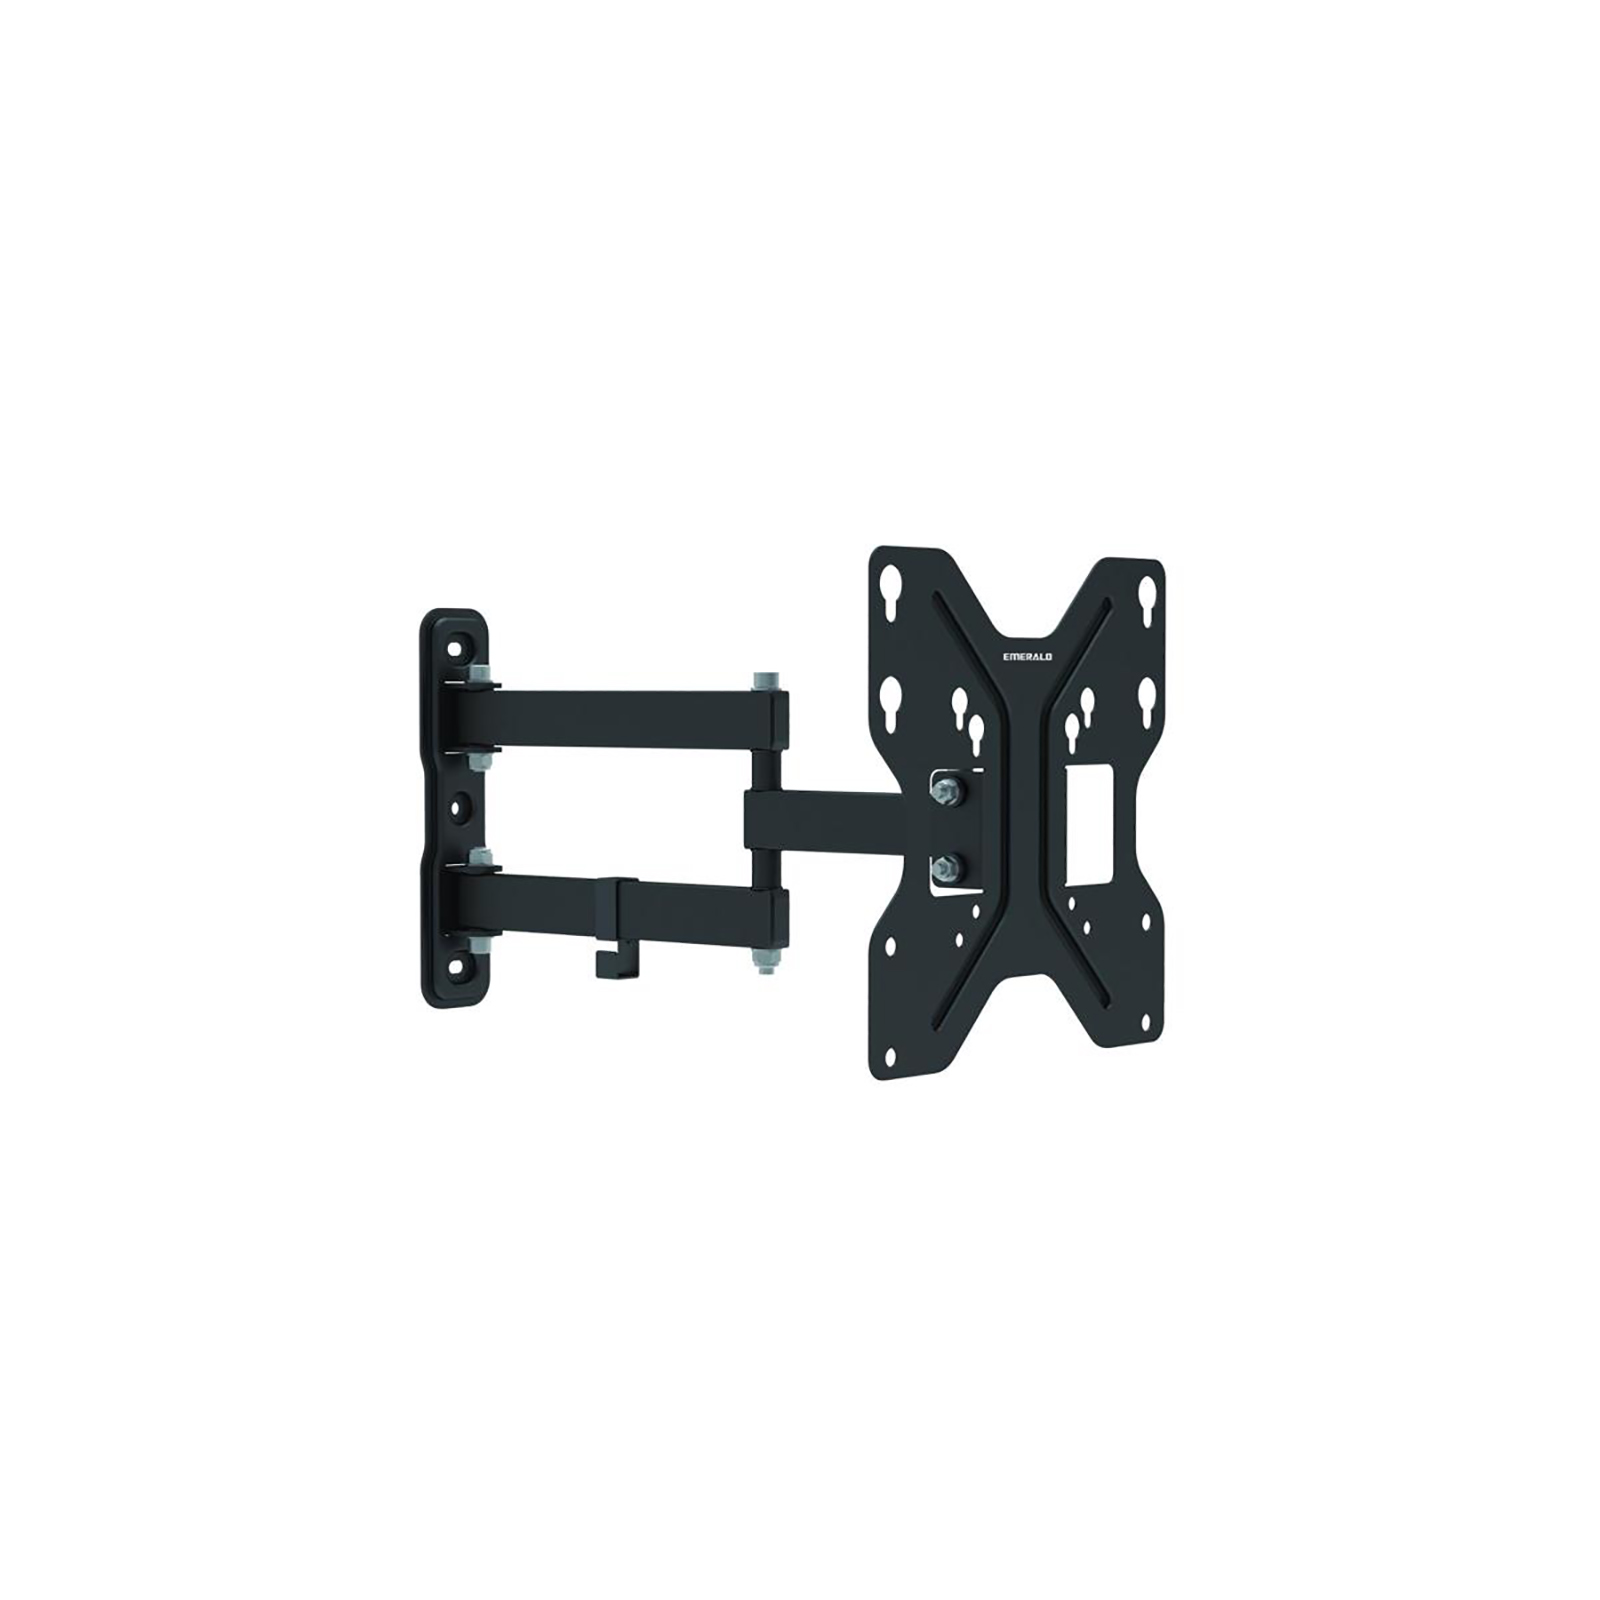 Emerald SM-720-8104 Full Motion TV Wall Mount For 23"-42" TVs